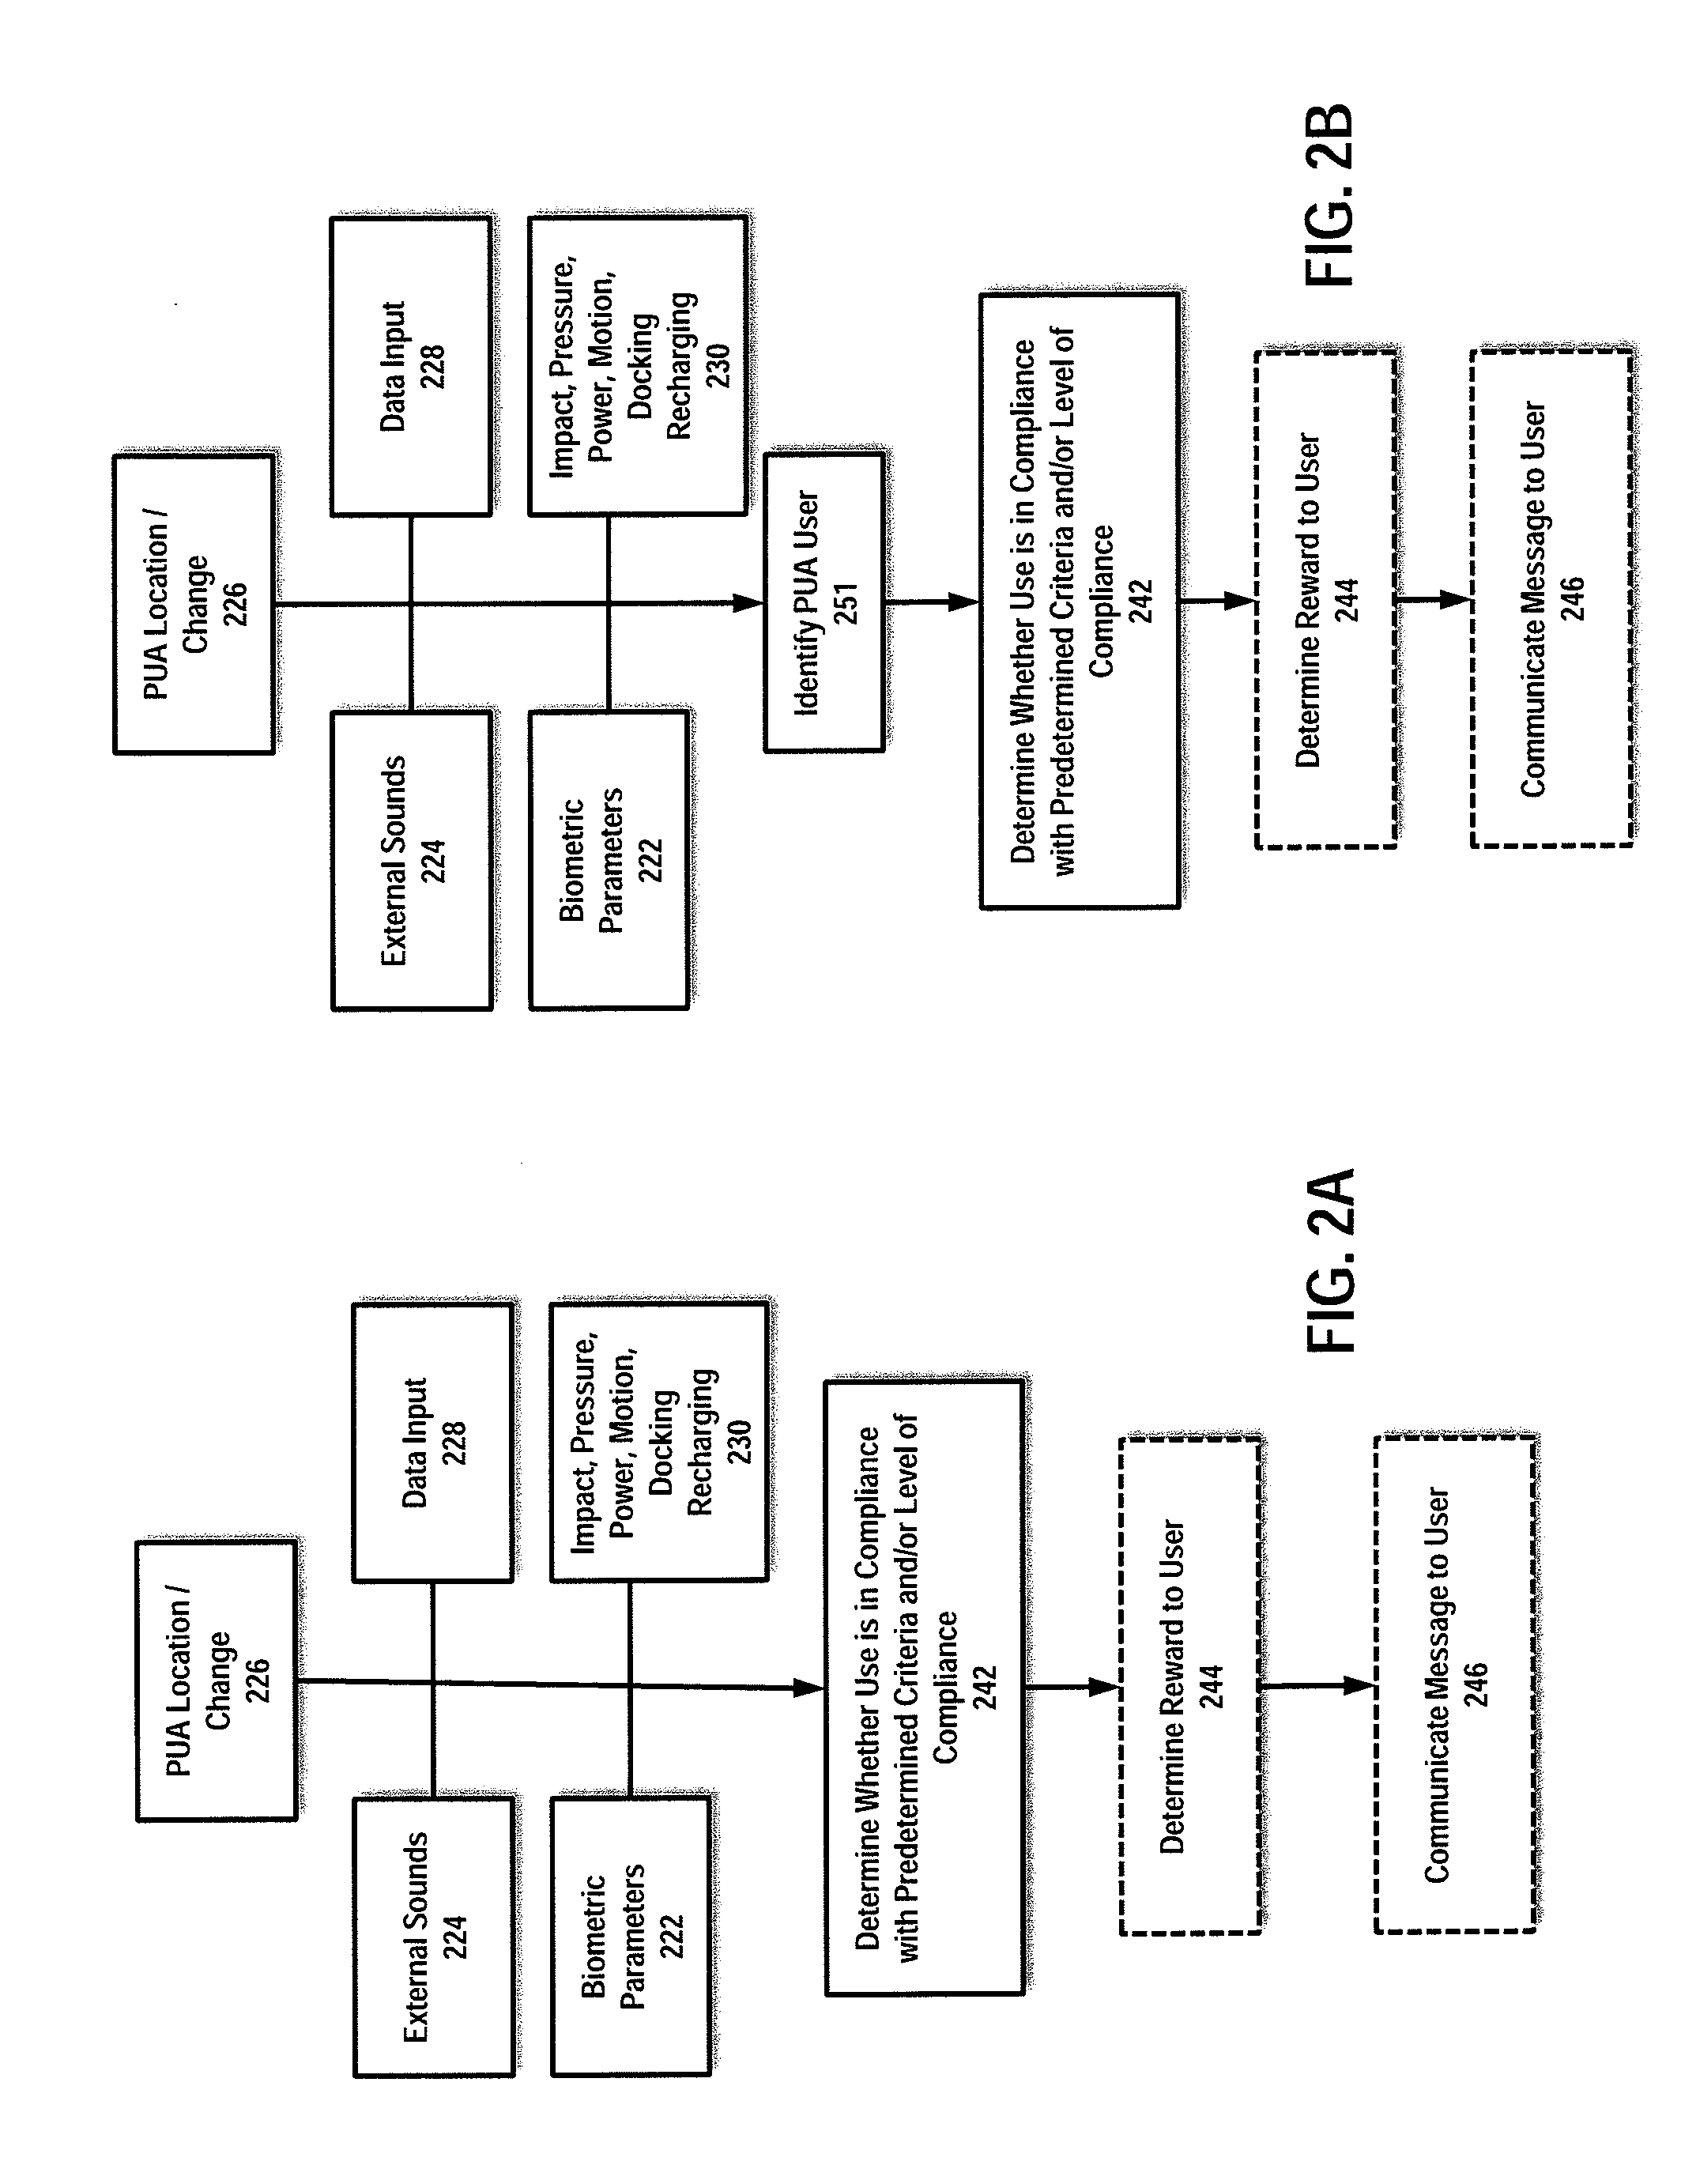 System and method for determinimg contextual characteristics of media exposure data